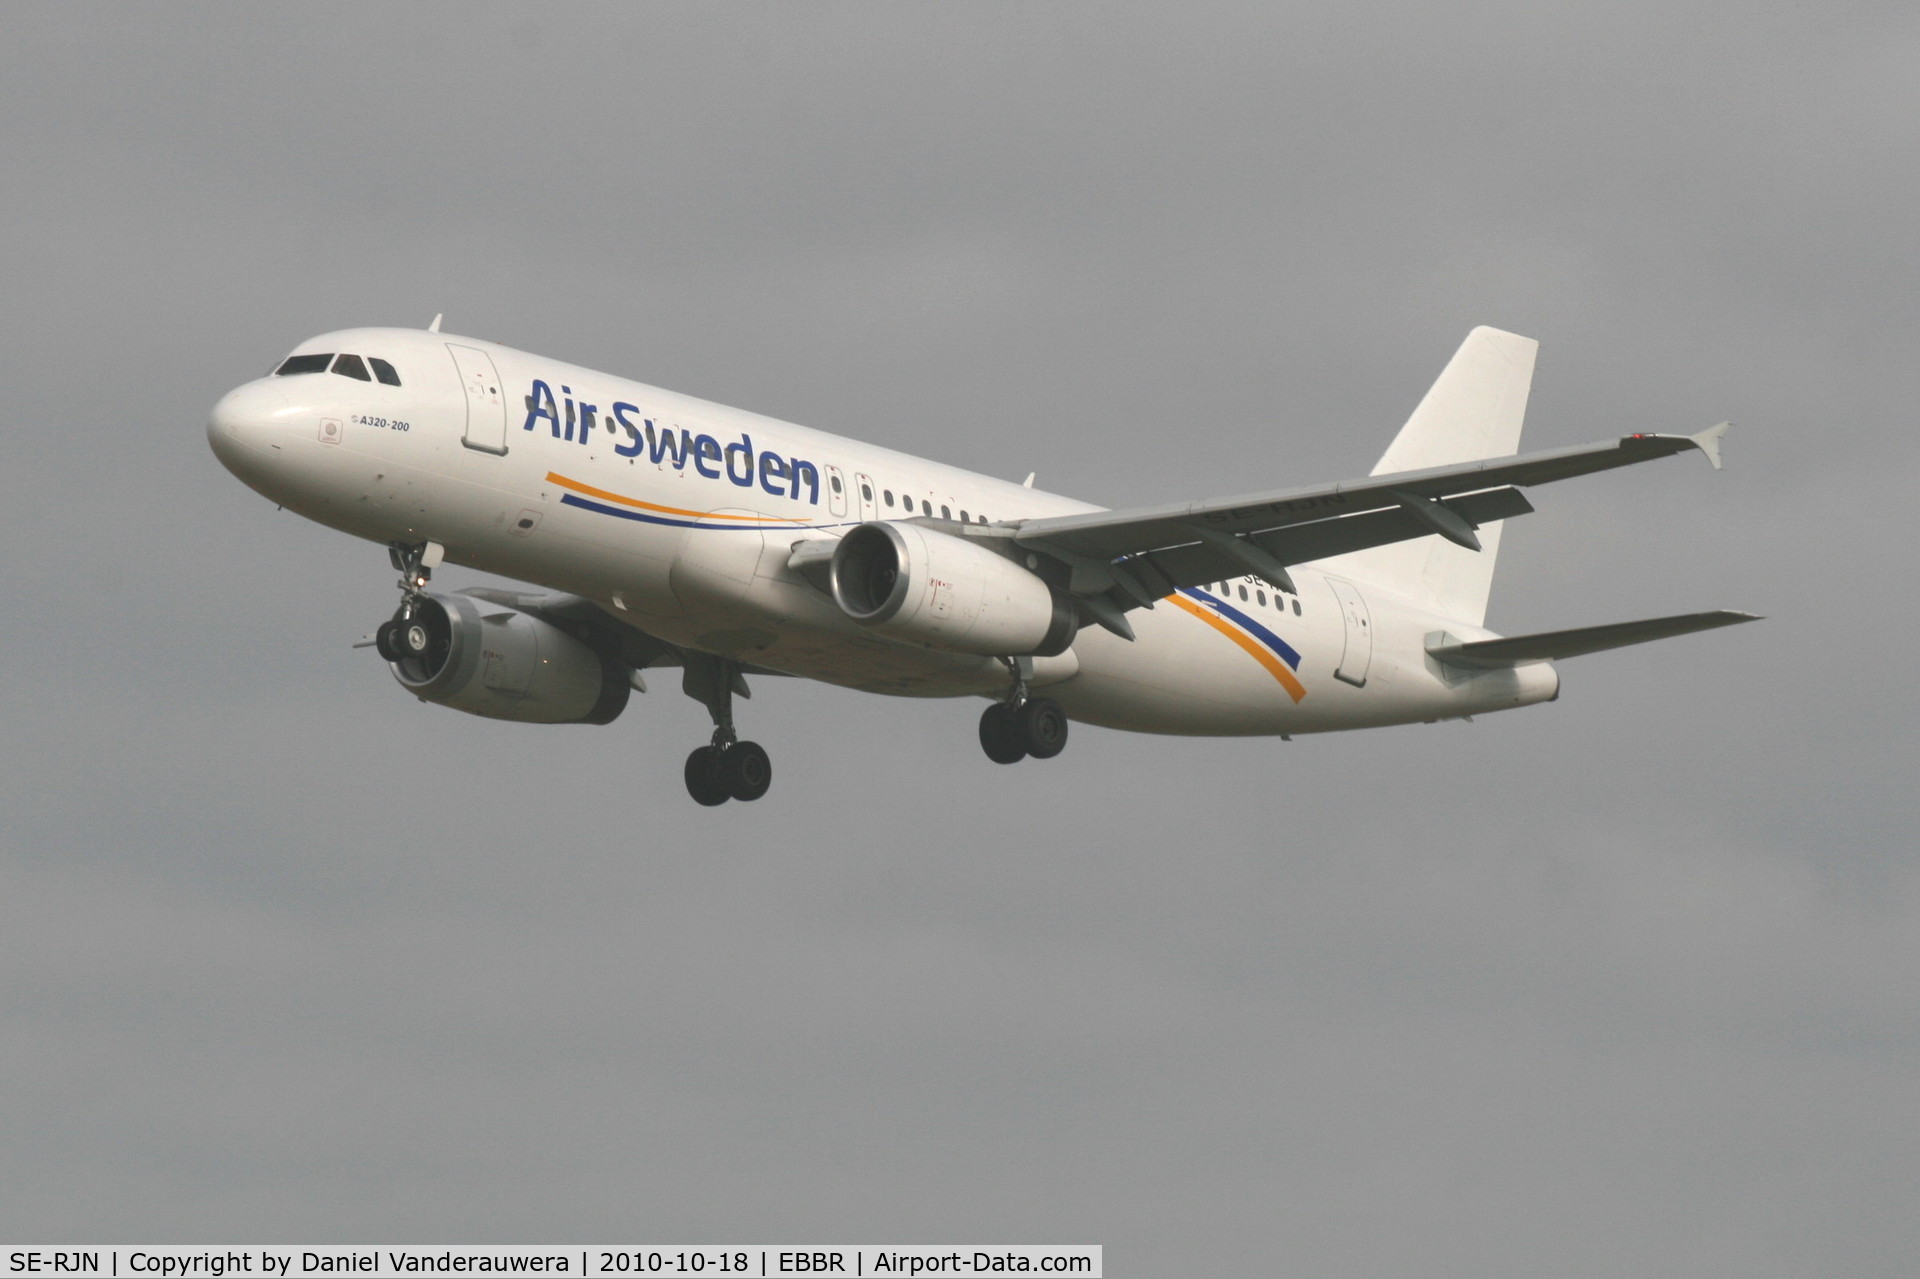 SE-RJN, 1991 Airbus A320-231 C/N 169, On approach to RWY 25L